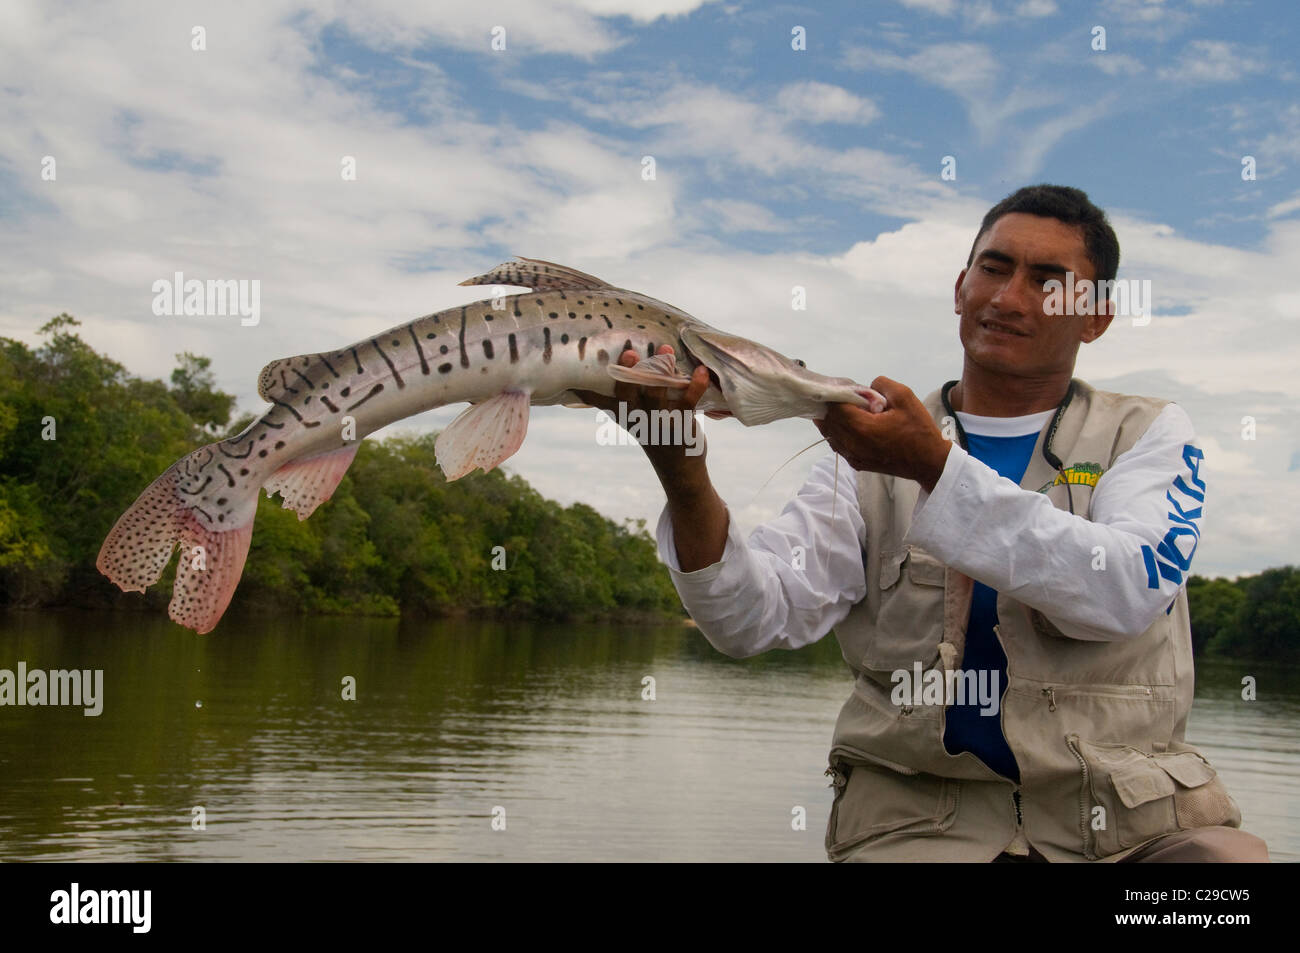 A guide lifts a big striped catfish caught in a deep lagoon off the Rio Bita in Colombia's Amazon Basin. Stock Photo